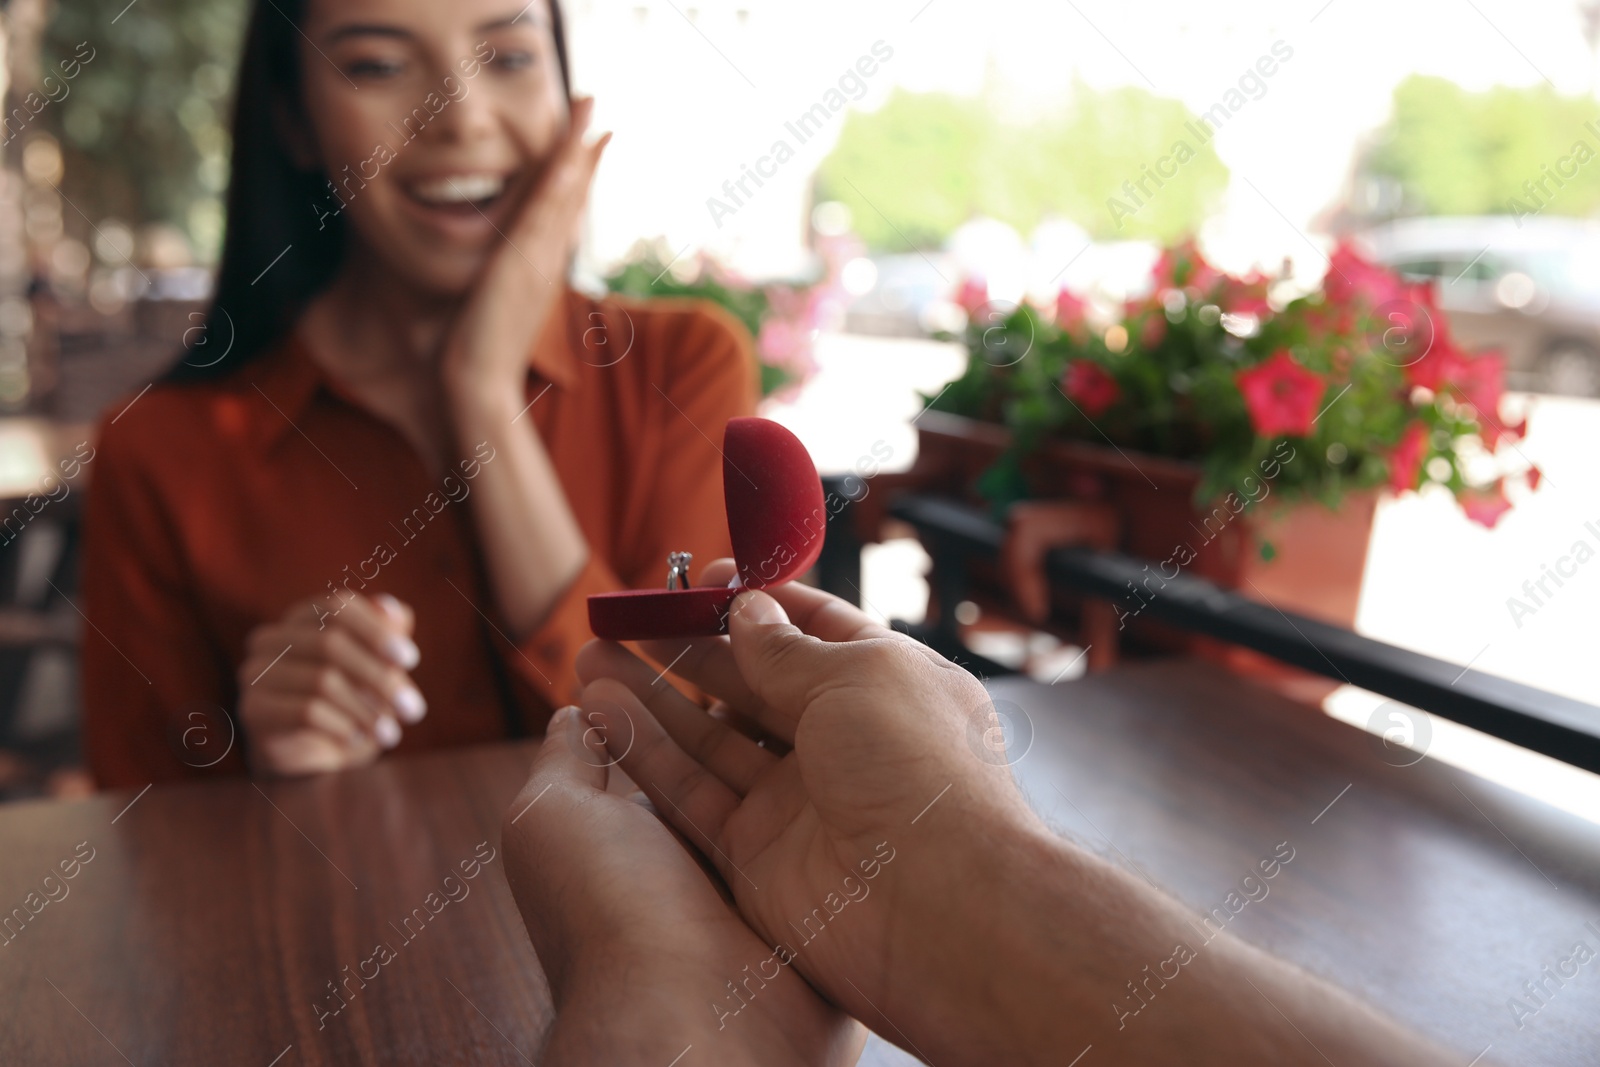 Photo of Man with engagement ring making proposal to his girlfriend in outdoor cafe, focus on hands